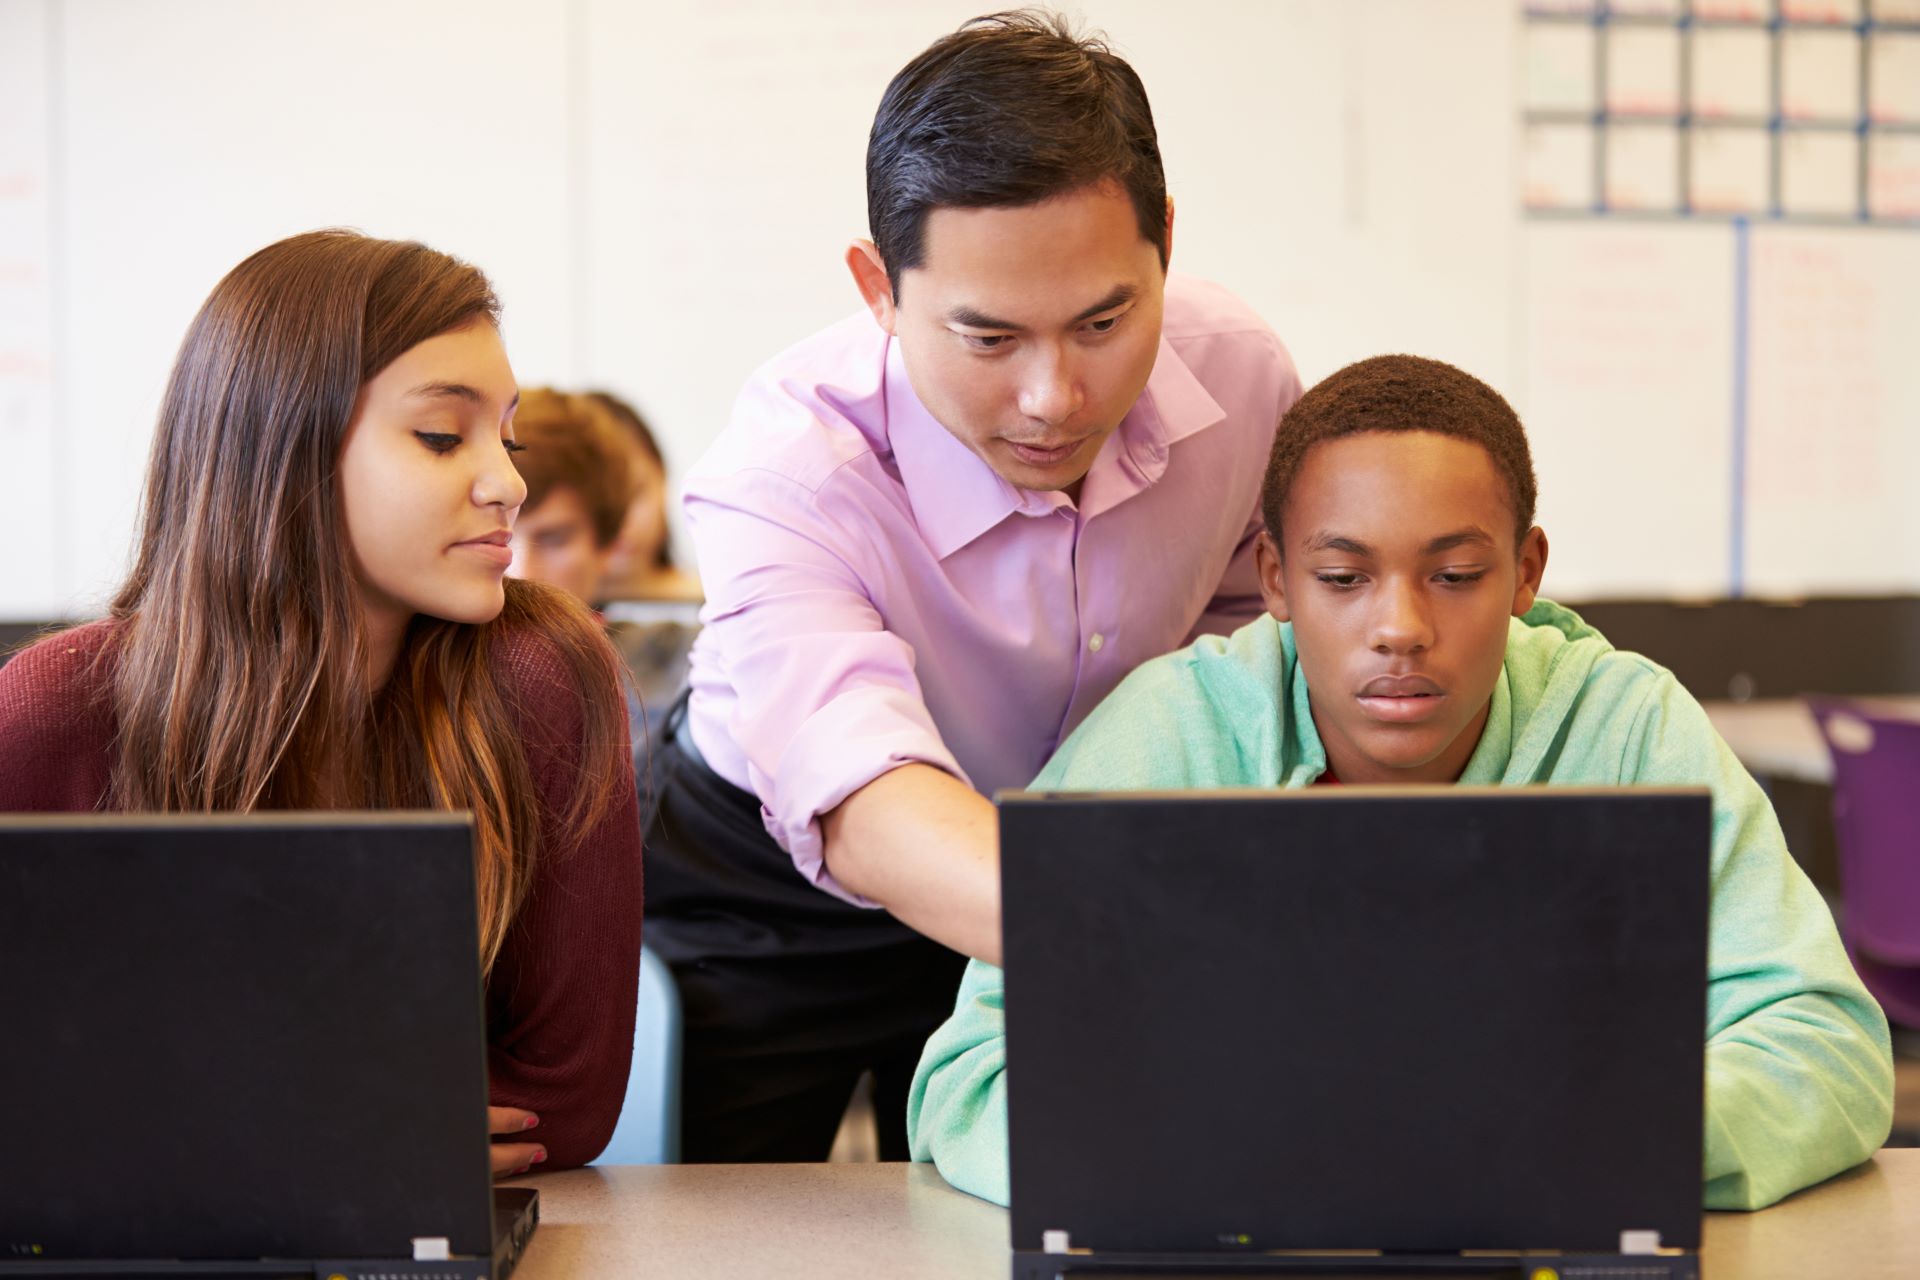 Male teacher showing students on a computer.